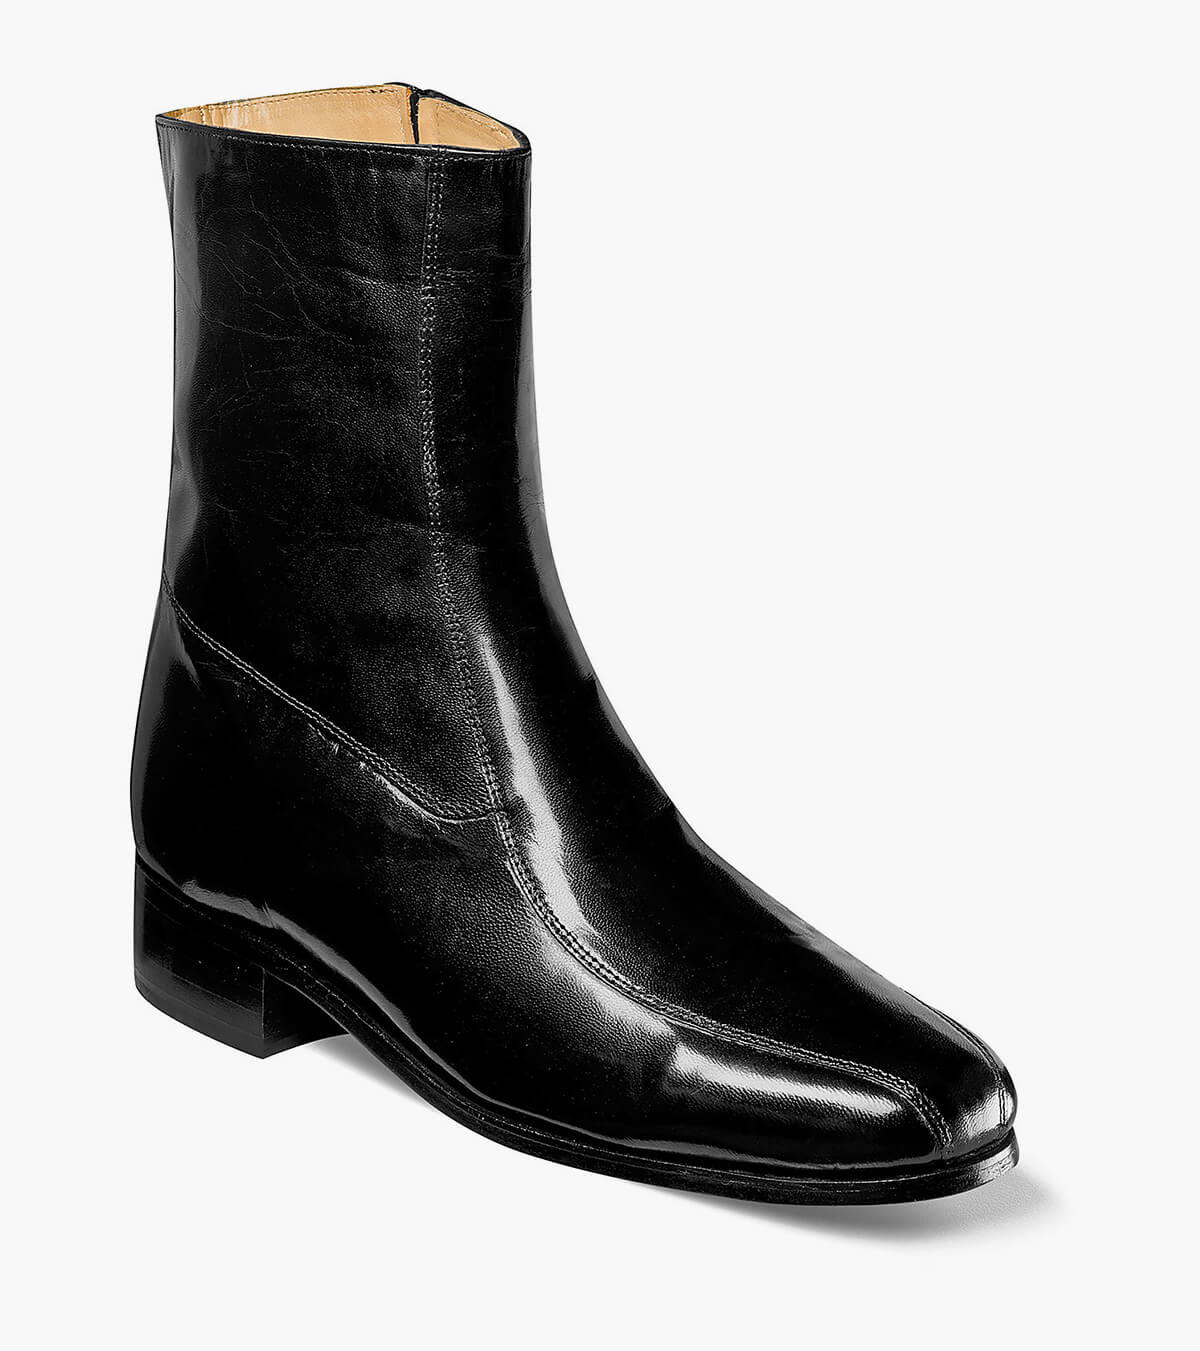 Bristol Bicycle Toe Leather Dress Boot